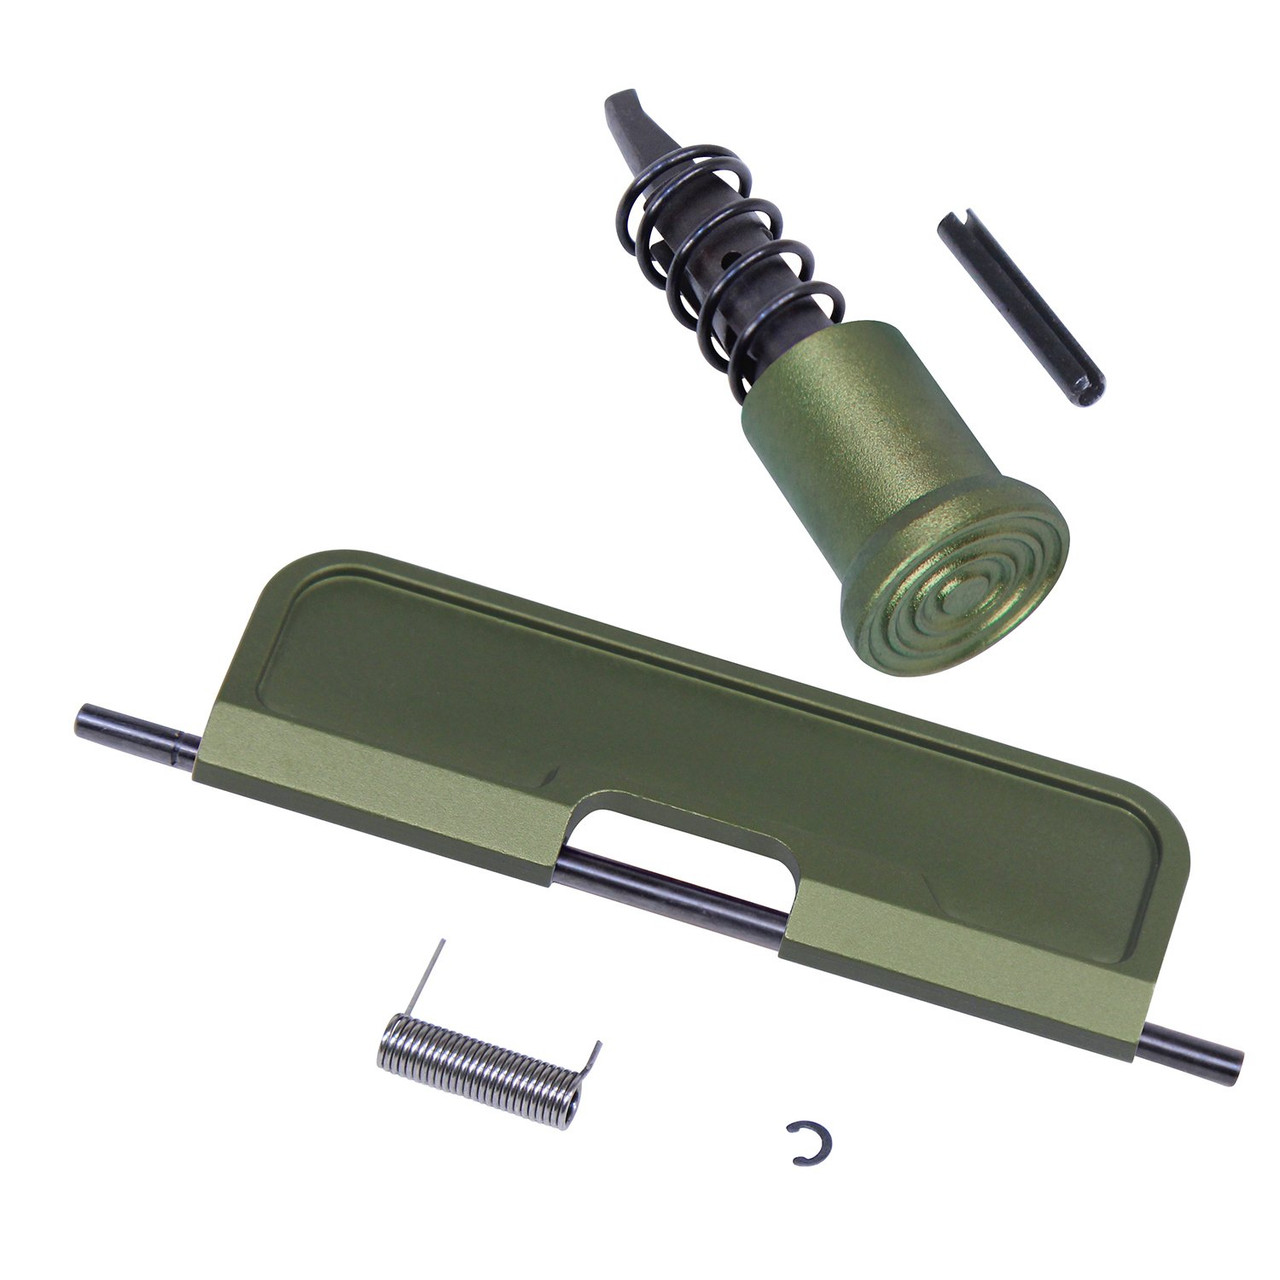 Guntec USA 223UPPER-CKIT-G3-GREEN AR-15 Upper Completion Kit With Gen 3 Dust Cover (Anodized Green)